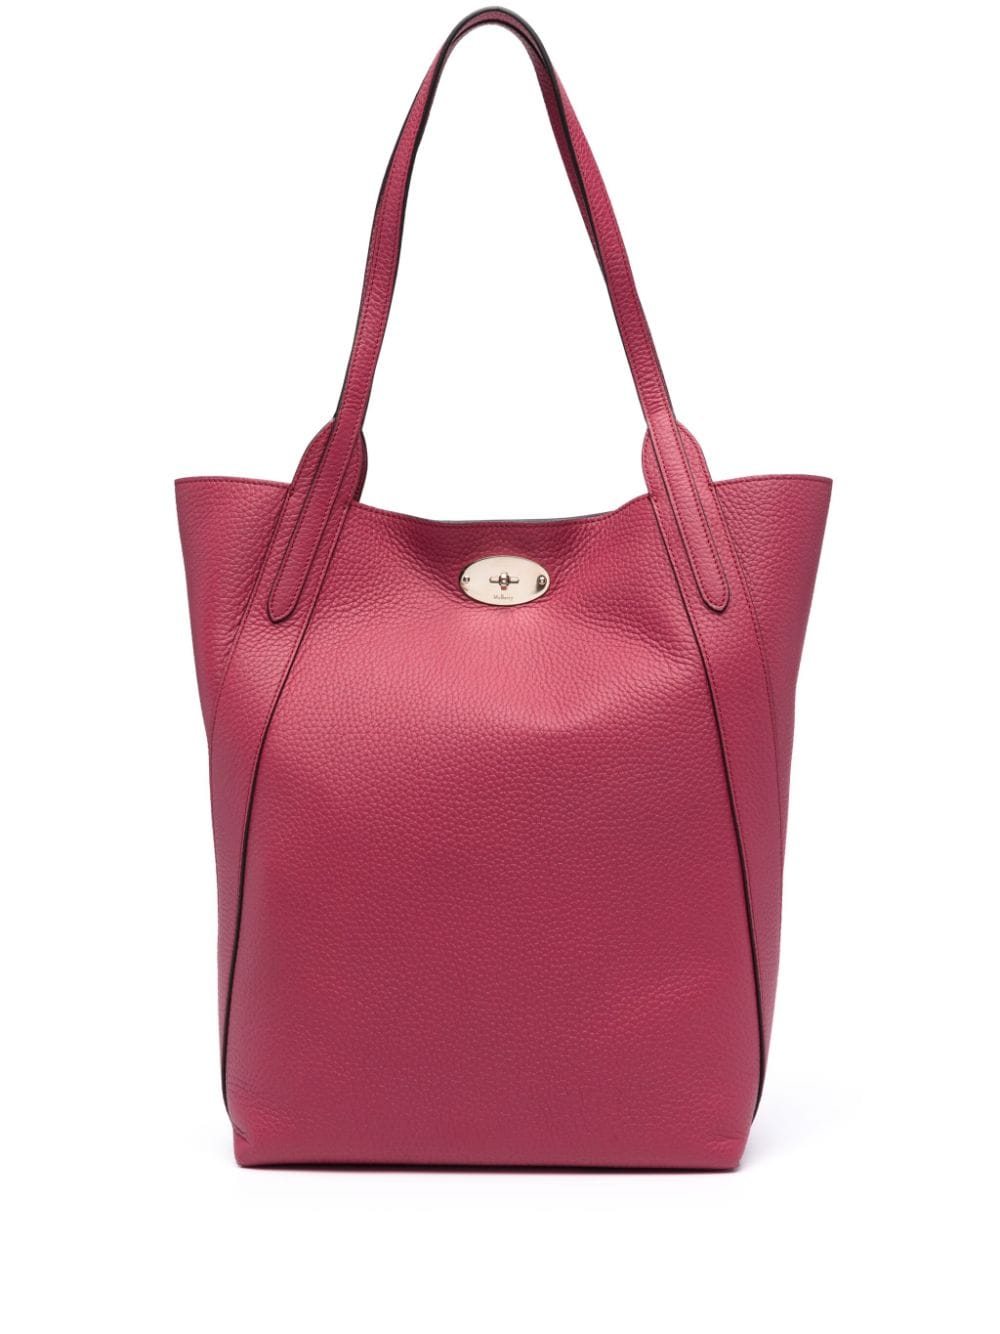 Mulberry North South Bayswater tote bag - Pink von Mulberry